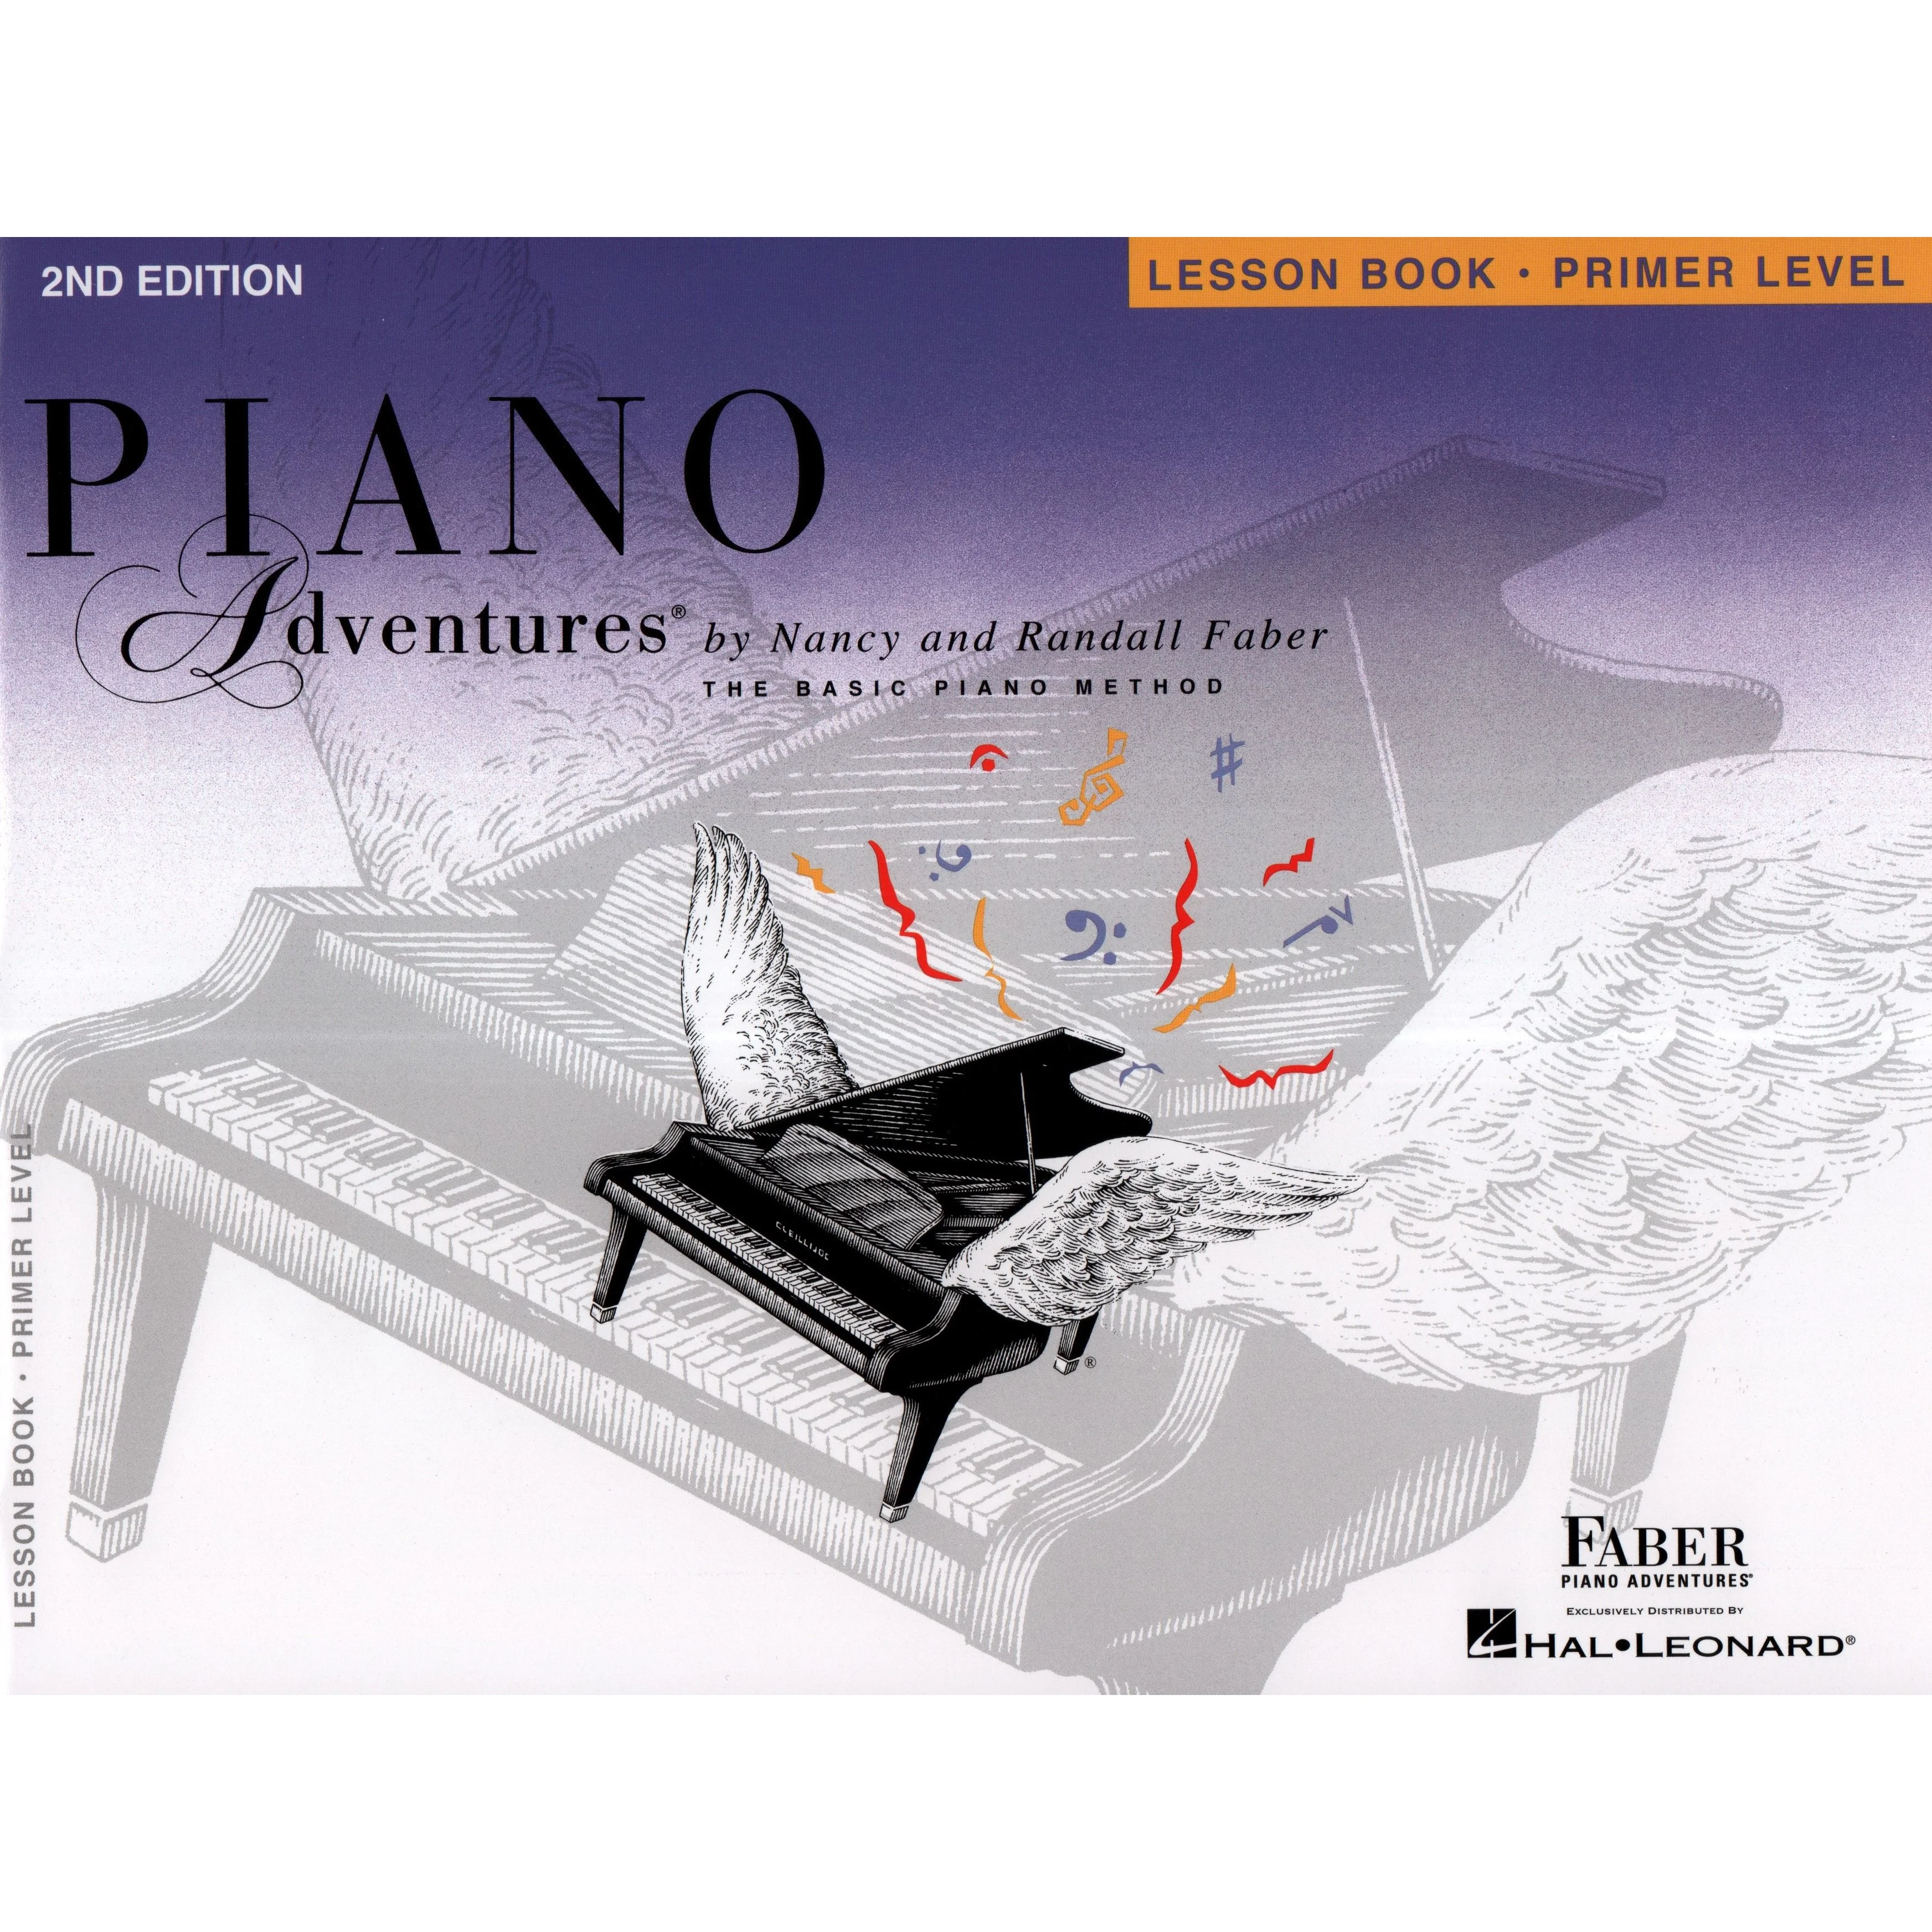 Faber Piano Adventures Level 1 - Popular Repertoire CD (Piano Adventures®) Faber  Piano Adventures® Series CD by Nancy Faber